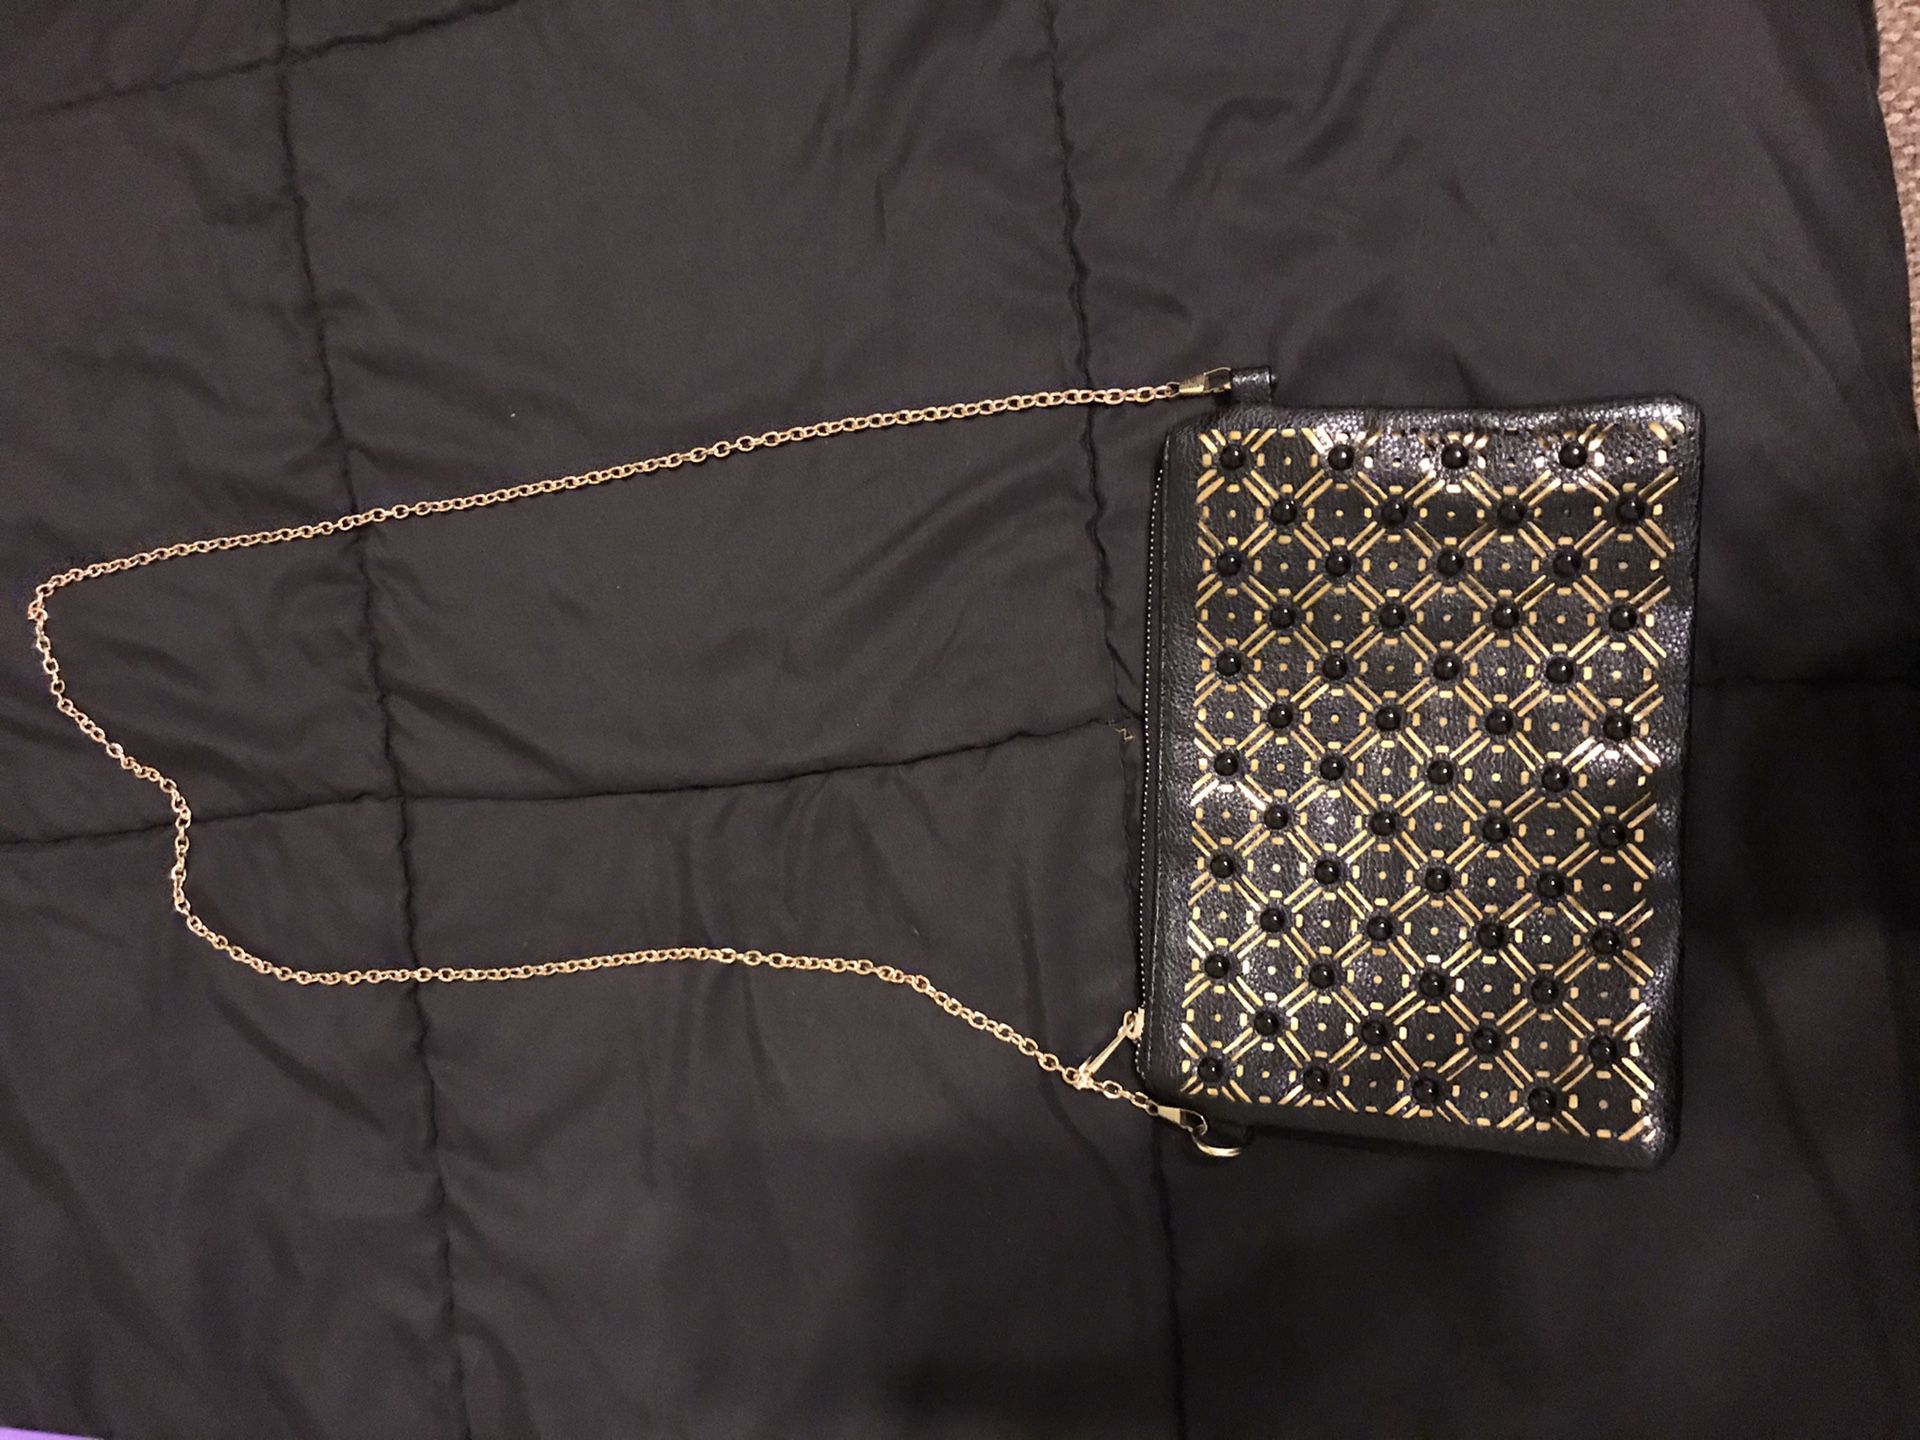 Expressions nyc crossbody black gold purse with removable chain strap